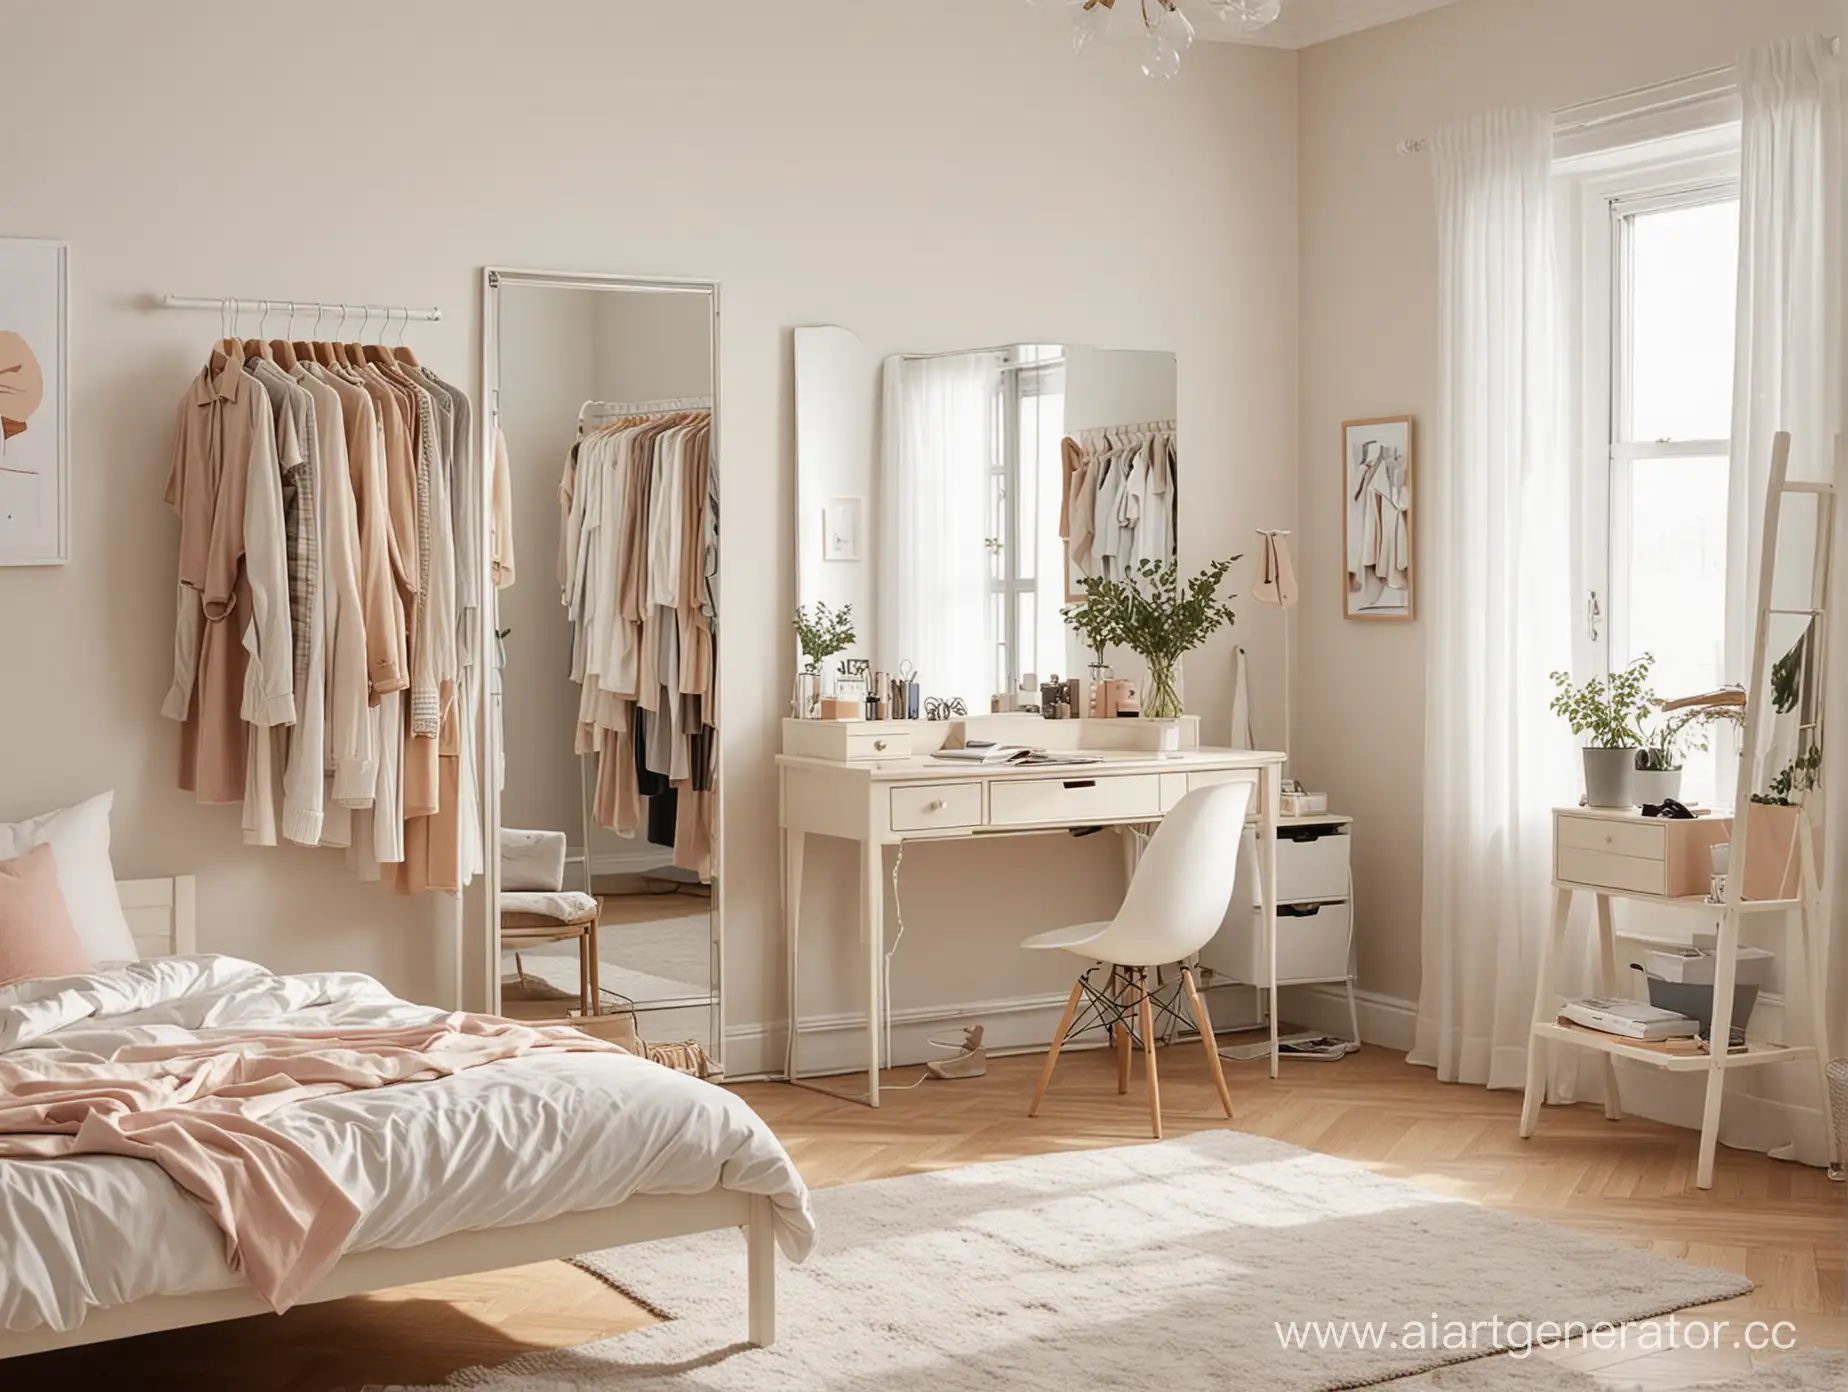 Modern-Teenage-Bedroom-with-Mirror-Clothes-Rack-and-Desk